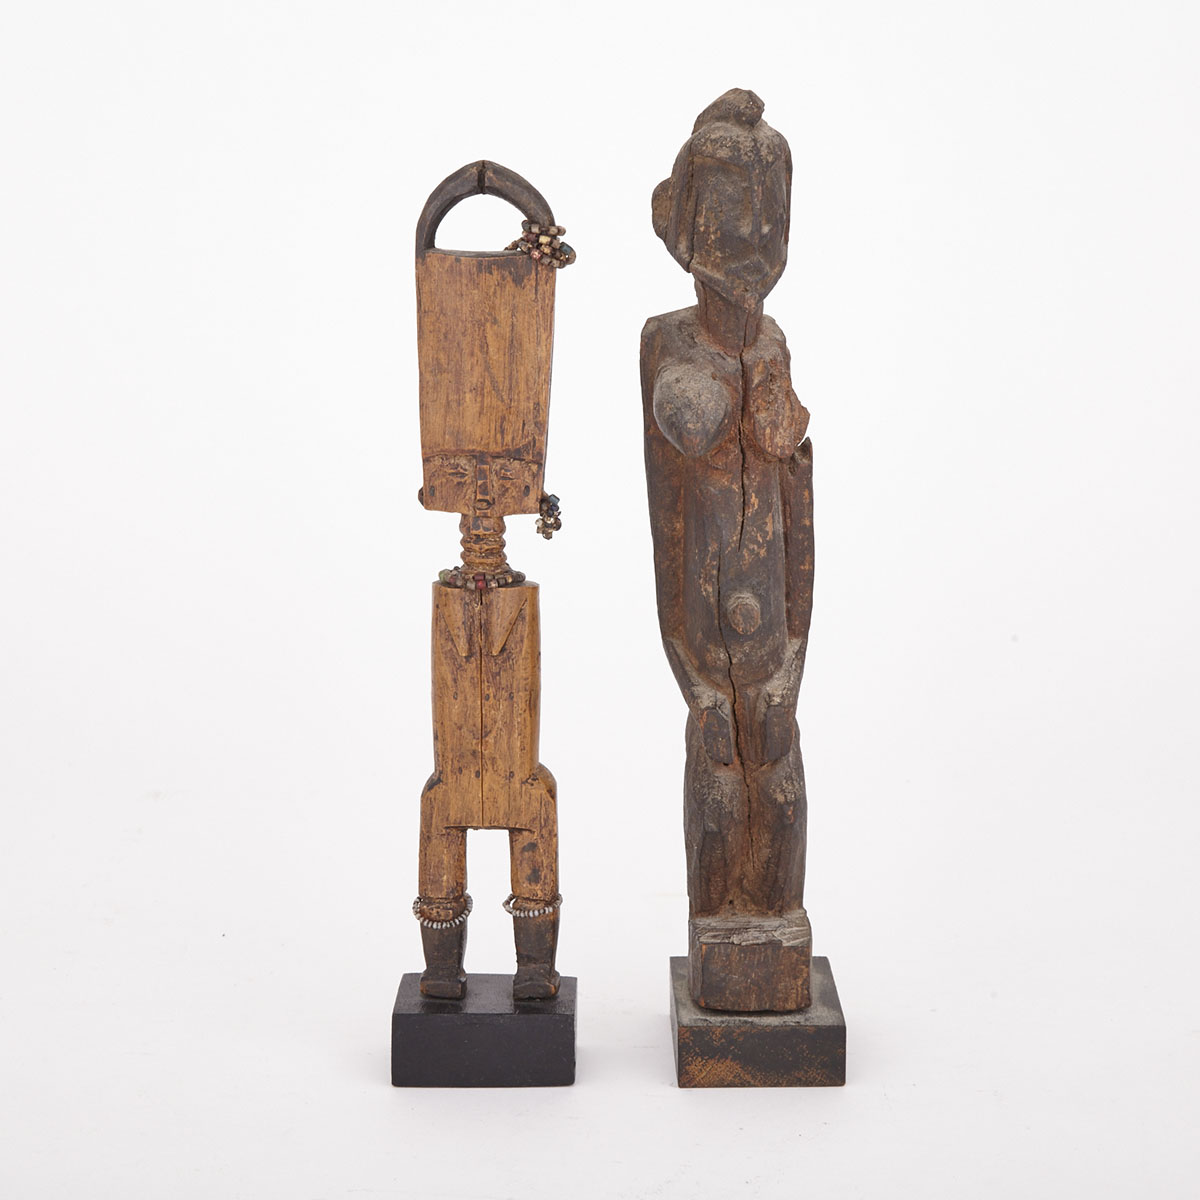 Fante Carved Wood Akuaba (Fertility) Doll with beaded decoration, West Africa, 20th century together with a Carved Wood Female Ancestral Figure, Africa, 20th century